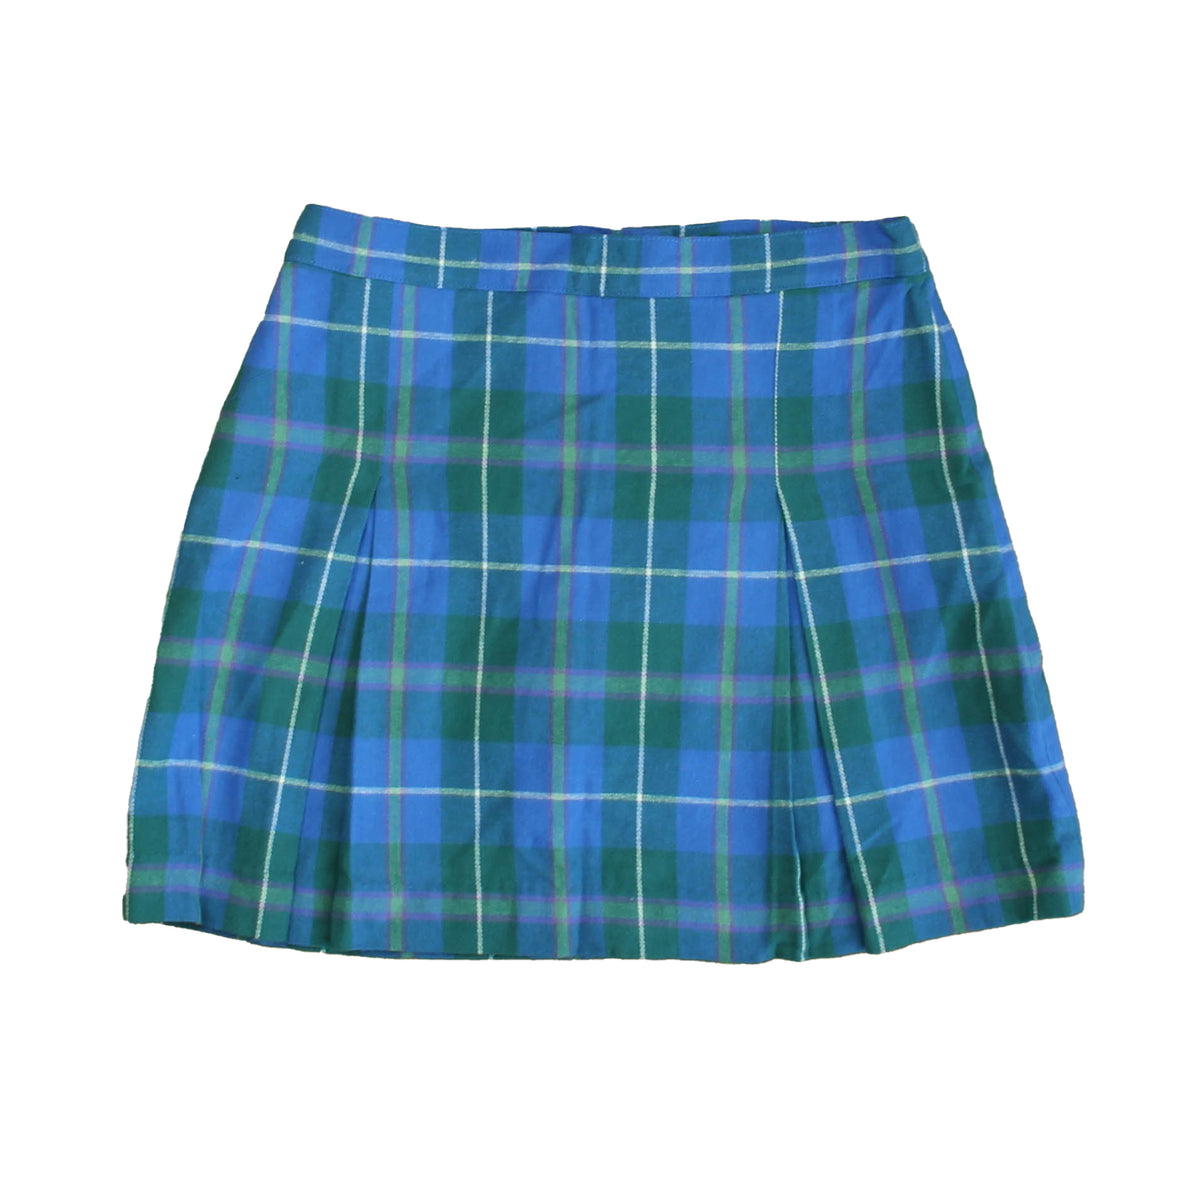 New with Tags: Rowayton Plaid Skirt size: 2-5T -- FINAL SALE